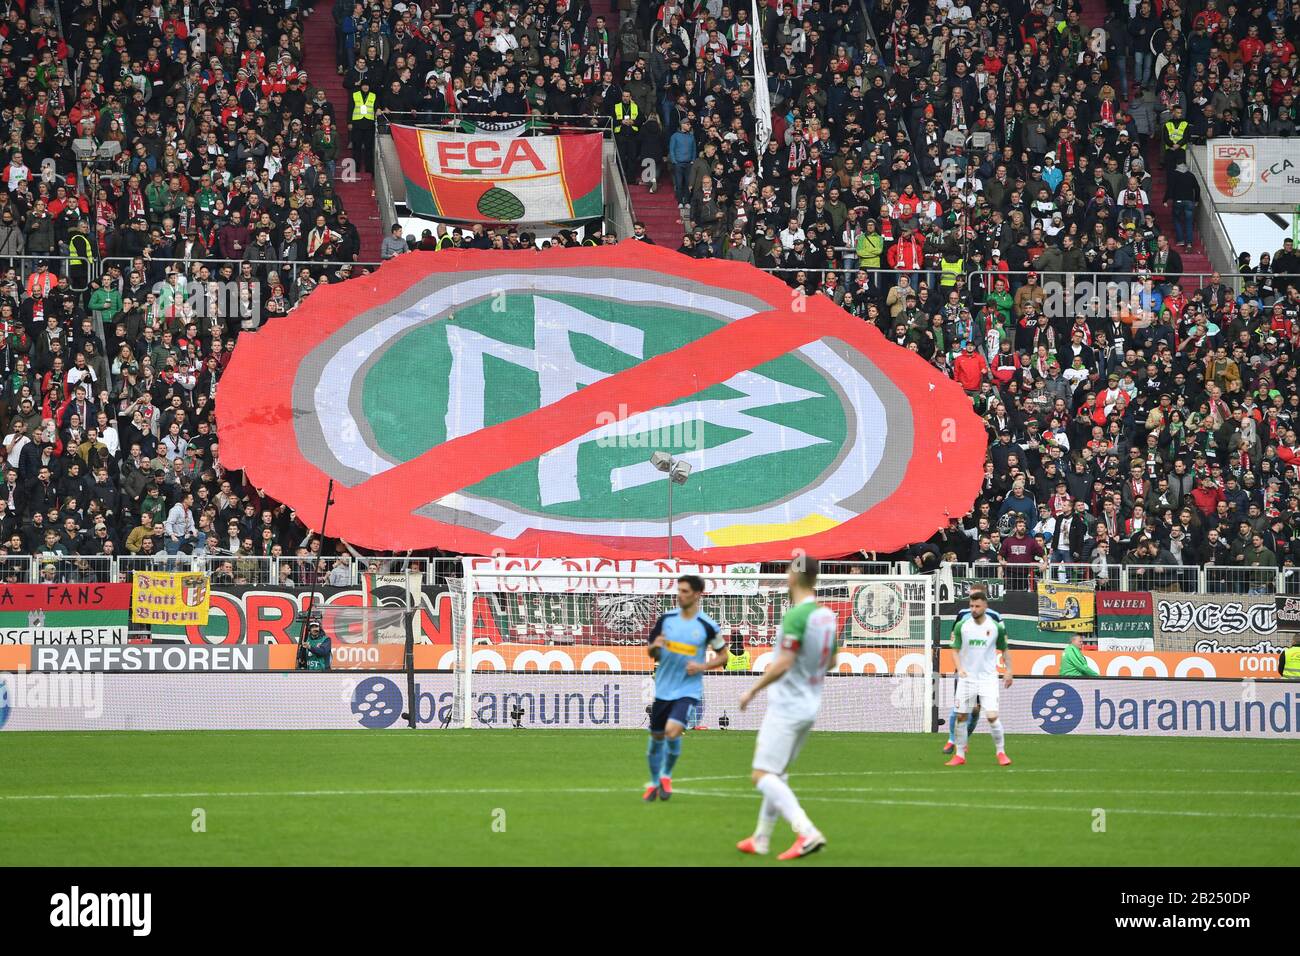 Anti DFB protest by ULTRAS from Augsburg. DFB logo, banner, transparent. Soccer 1.Bundesliga, 24.matchday, matchday24, FC Augsburg (A) -Borussia Monchengladbach (MG) 2-3. on February 29, 2020 in Augsburg, WWKARENA, DFL REGULATIONS PROHIBIT ANY USE OF PHOTOGRAPHS AS IMAGE SEQUENCES AND/OR QUASI-VIDEO. ? Sven Simon Fotoagentur GmbH & Co. Press Photo KG # Prinzess-Luise-Str. 41 # 45479 M uelheim/R uhr # Tel. 0208/9413250 # Fax. 0208/9413260 # GLS Bank # BLZ 430 609 67 # Kto. 4030 025 100 # IBAN DE75 4306 0967 4030 0251 00 # BIC GENODEM1GLS # www.svensimon.net. | usage worldwide Stock Photo